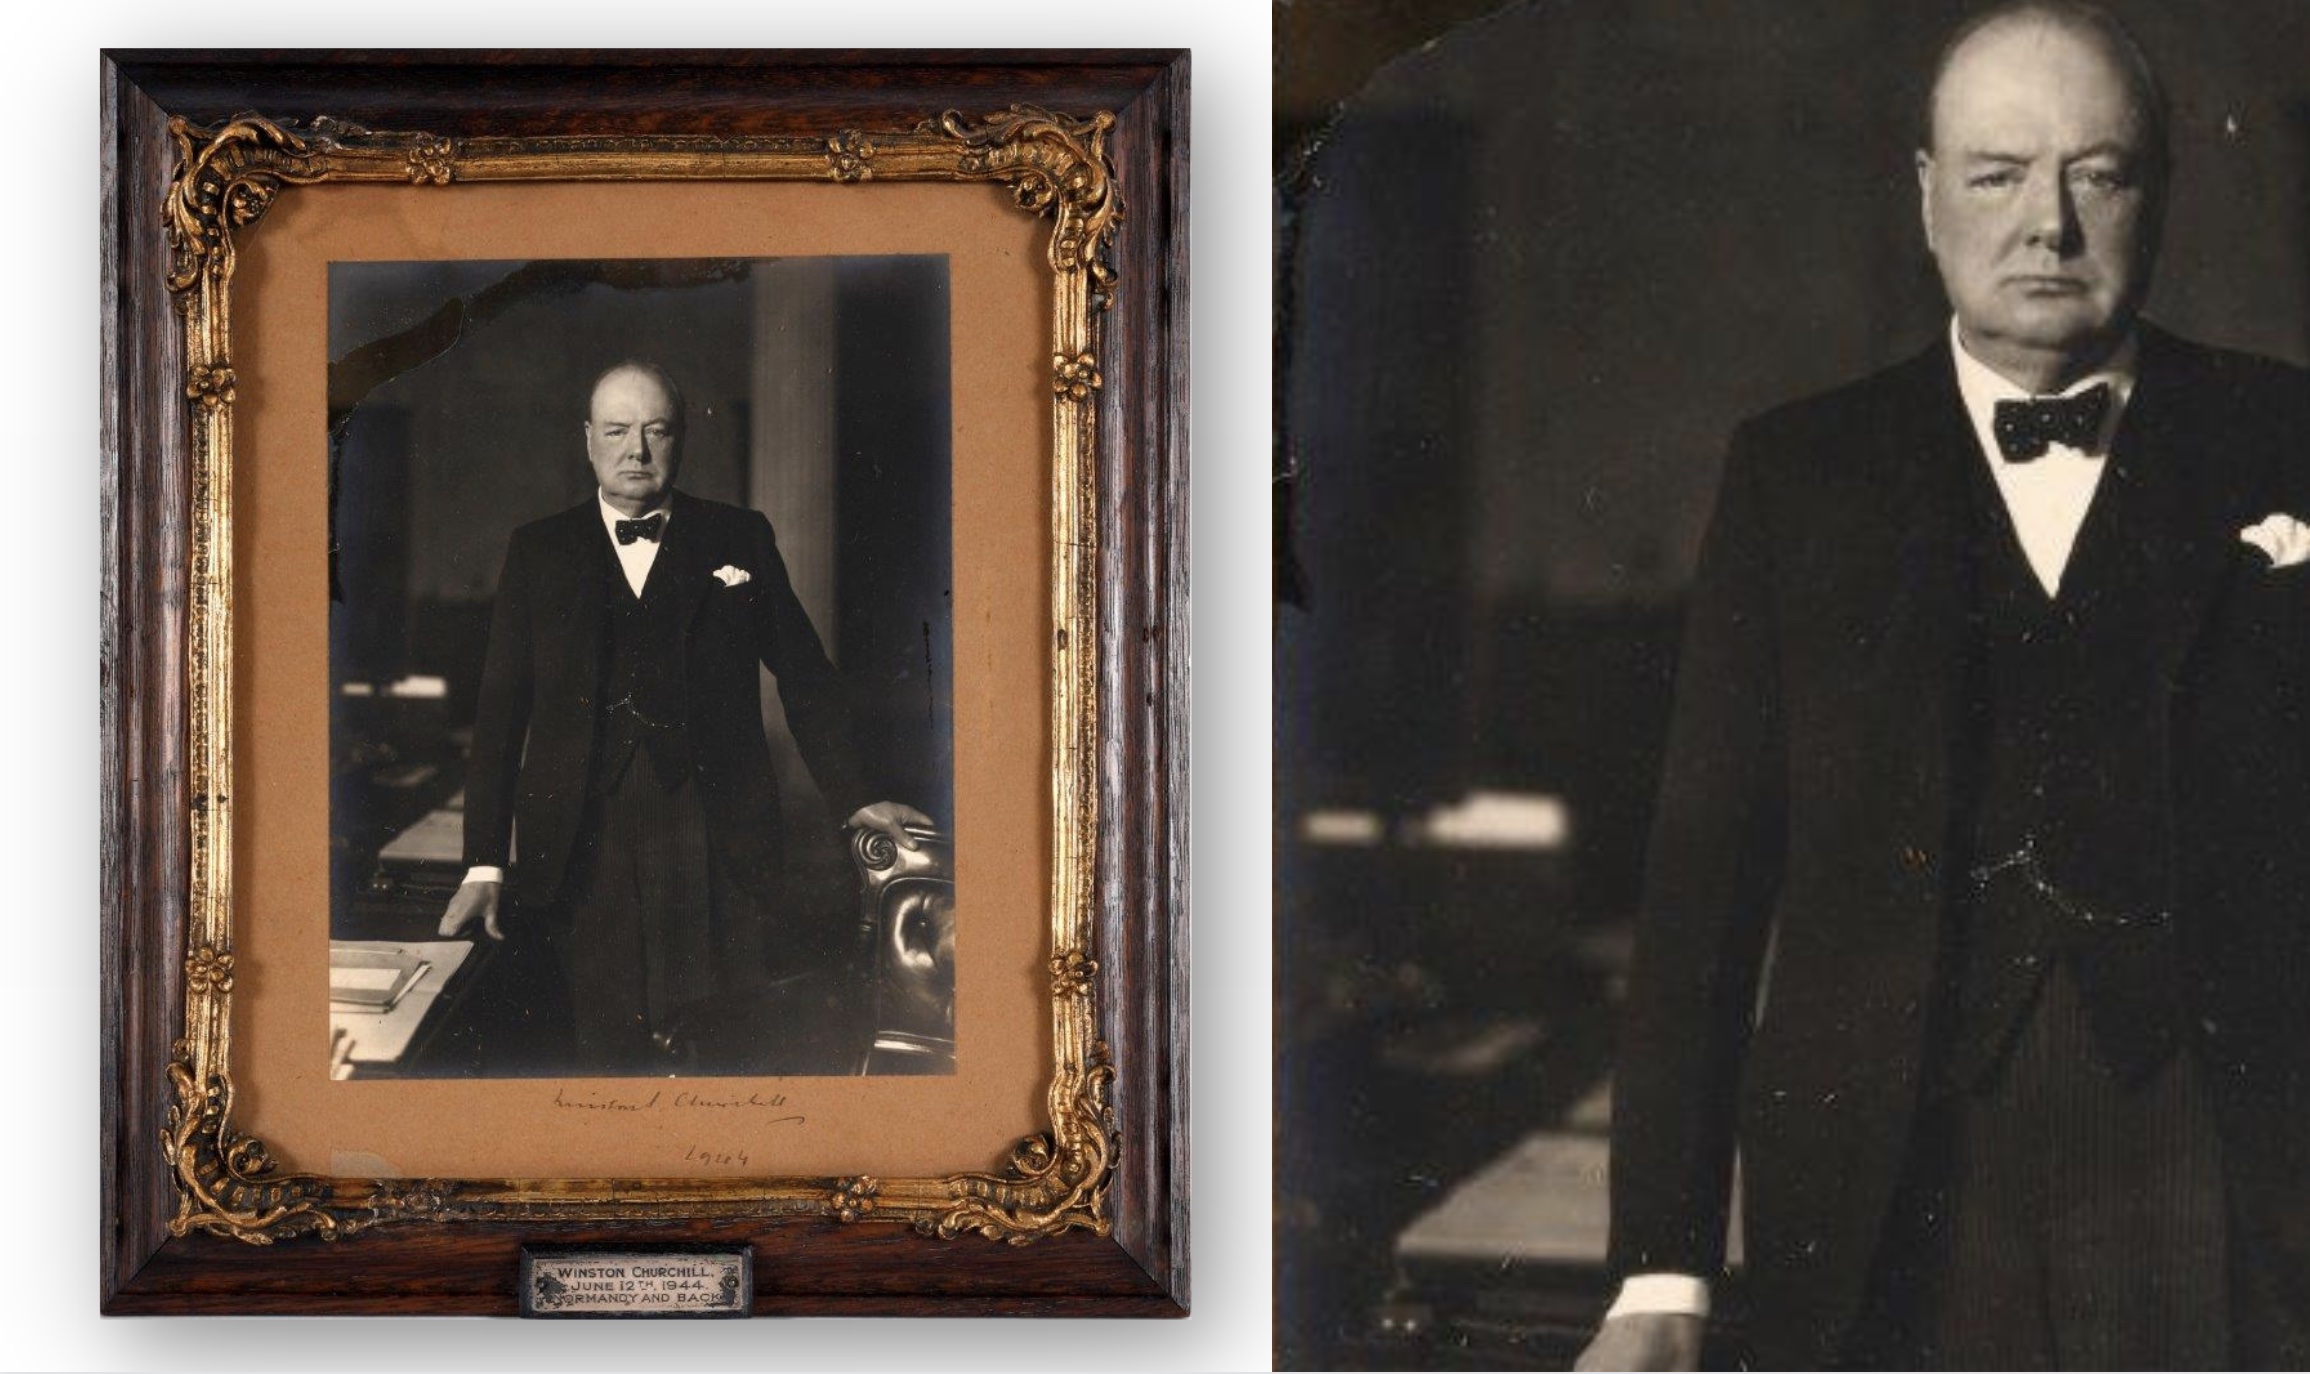 Winston Churchill photograph is leader in sale - Antique Collecting